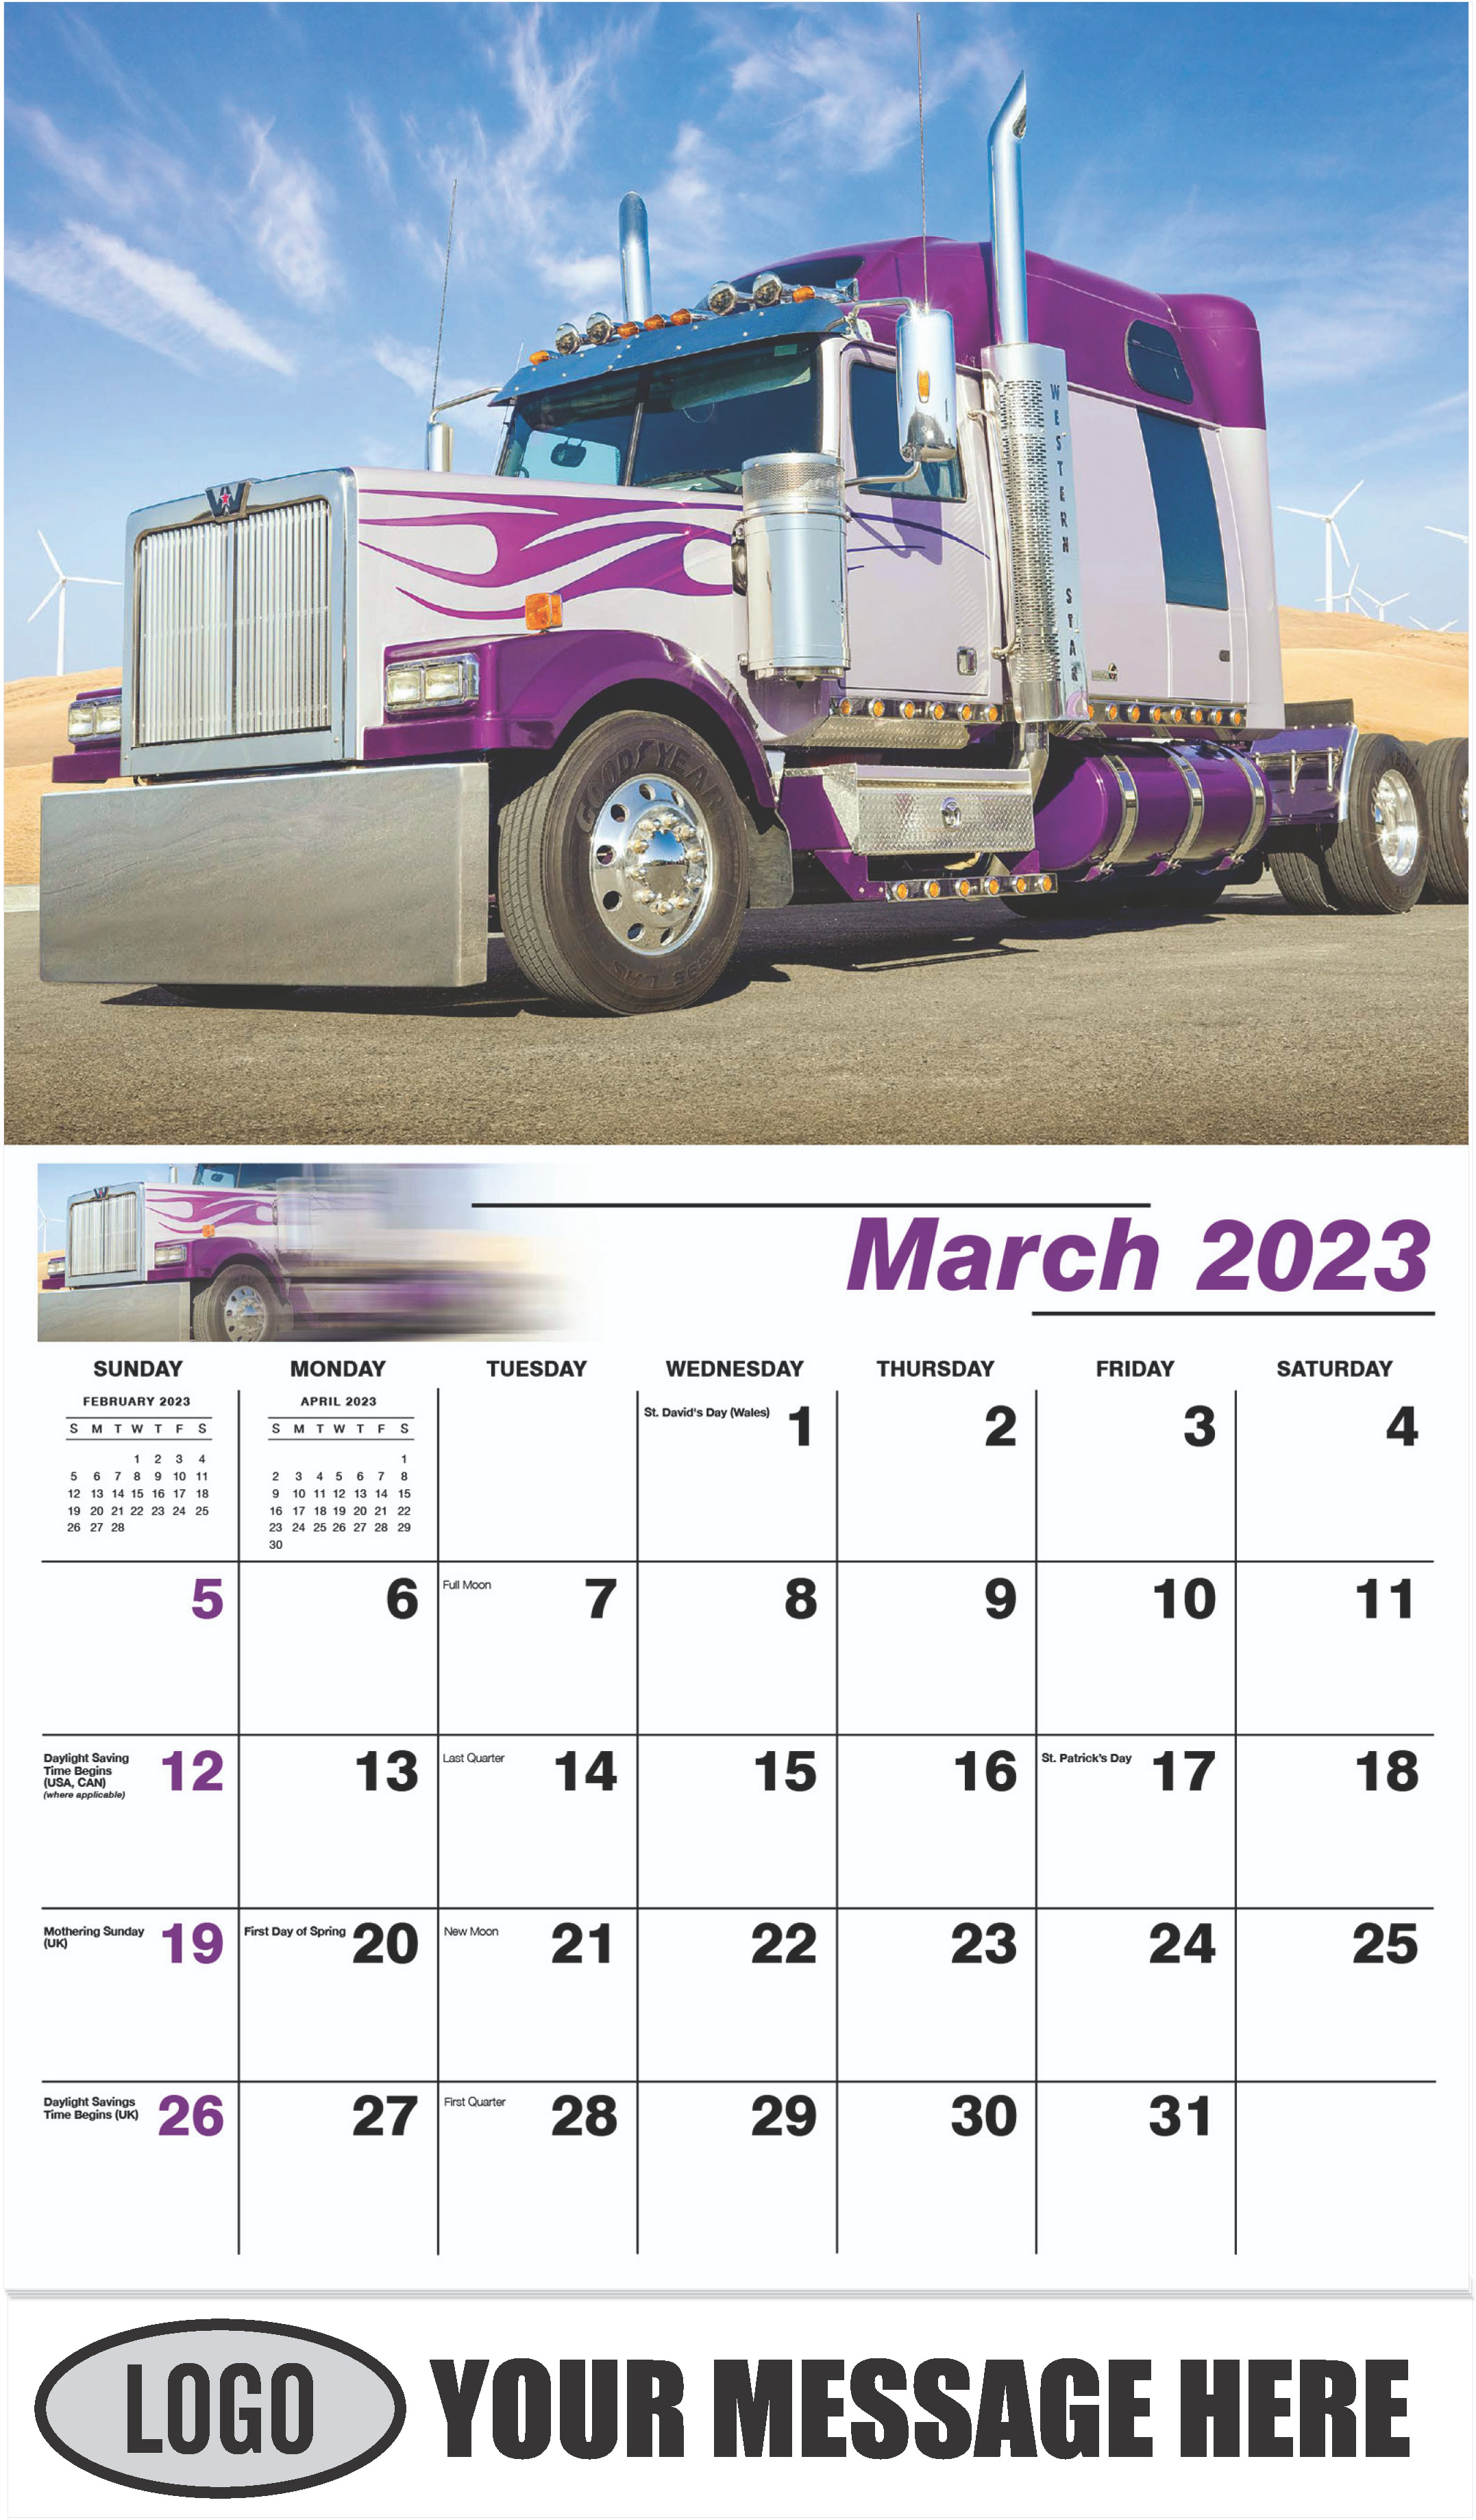 Western Star Big Rig - March - Kings of the Road 2023 Promotional Calendar